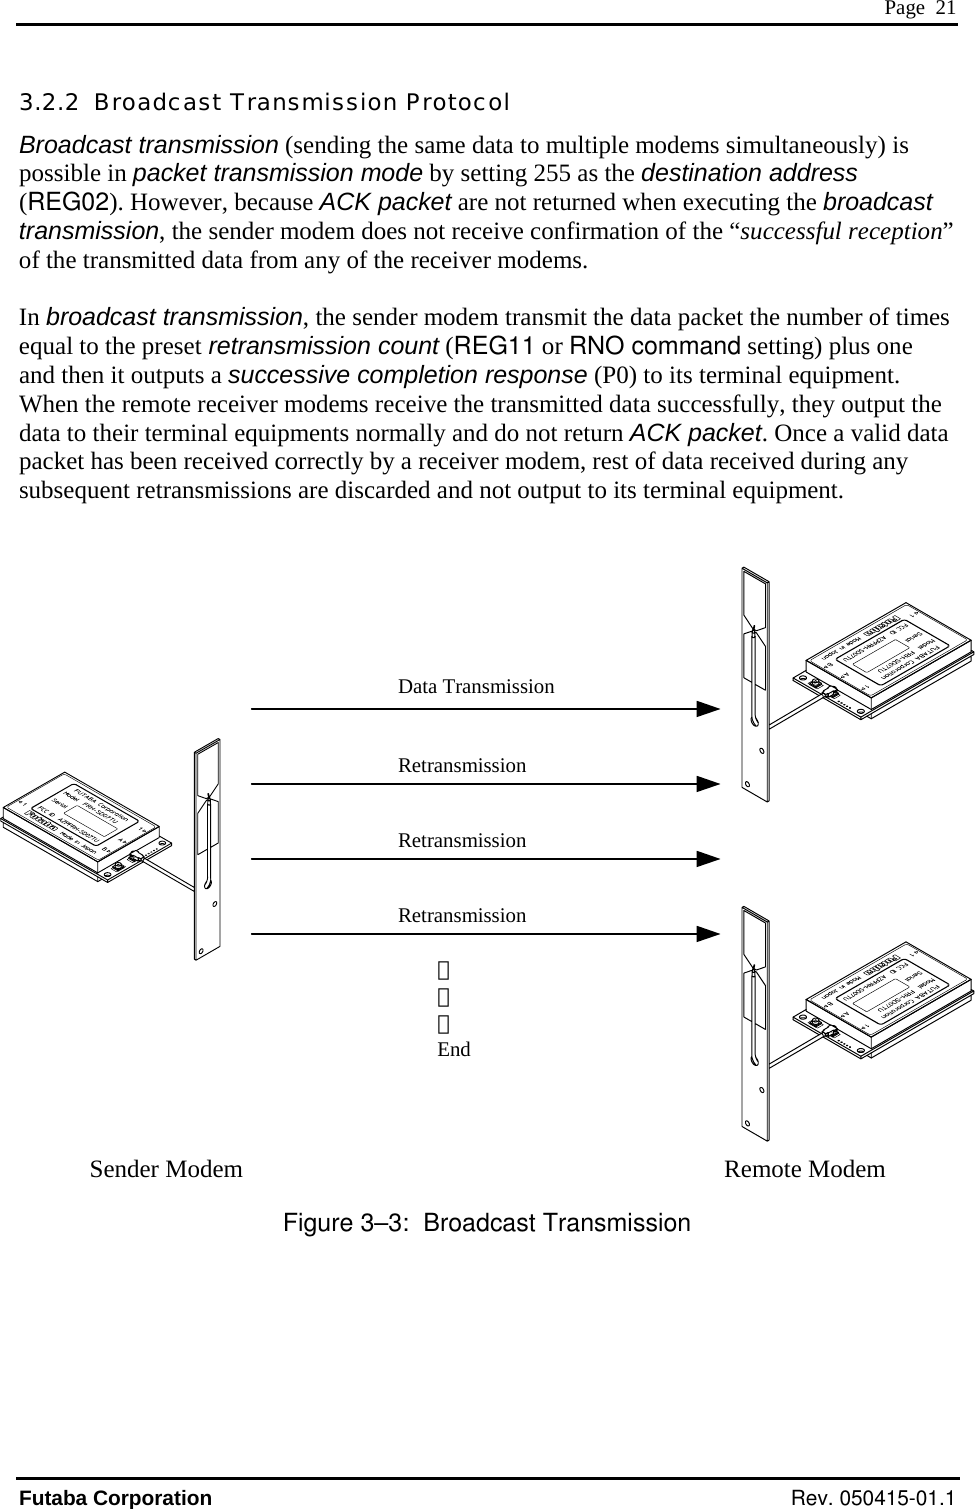  Page  21 3.2.2  Broadcast Transmission Protocol Broadcast transmission (sending the same data to multiple modems simultaneously) is possible in packet transmission mode by setting 255 as the destination address (REG02). However, because ACK packet are not returned when executing the broadcast transmission, the sender modem does not receive confirmation of the “successful reception” of the transmitted data from any of the receiver modems.  In broadcast transmission, the sender modem transmit the data packet the number of times equal to the preset retransmission count (REG11 or RNO command setting) plus one and then it outputs a successive completion response (P0) to its terminal equipment. When the remote receiver modems receive the transmitted data successfully, they output the data to their terminal equipments normally and do not return ACK packet. Once a valid data packet has been received correctly by a receiver modem, rest of data received during any subsequent retransmissions are discarded and not output to its terminal equipment.                                                                                  Sender Modem                                                                             Remote Modem Figure 3–3:  Broadcast Transmission Data Transmission RetransmissionRetransmissionRetransmission・ ・ ・ EndFutaba Corporation Rev. 050415-01.1 